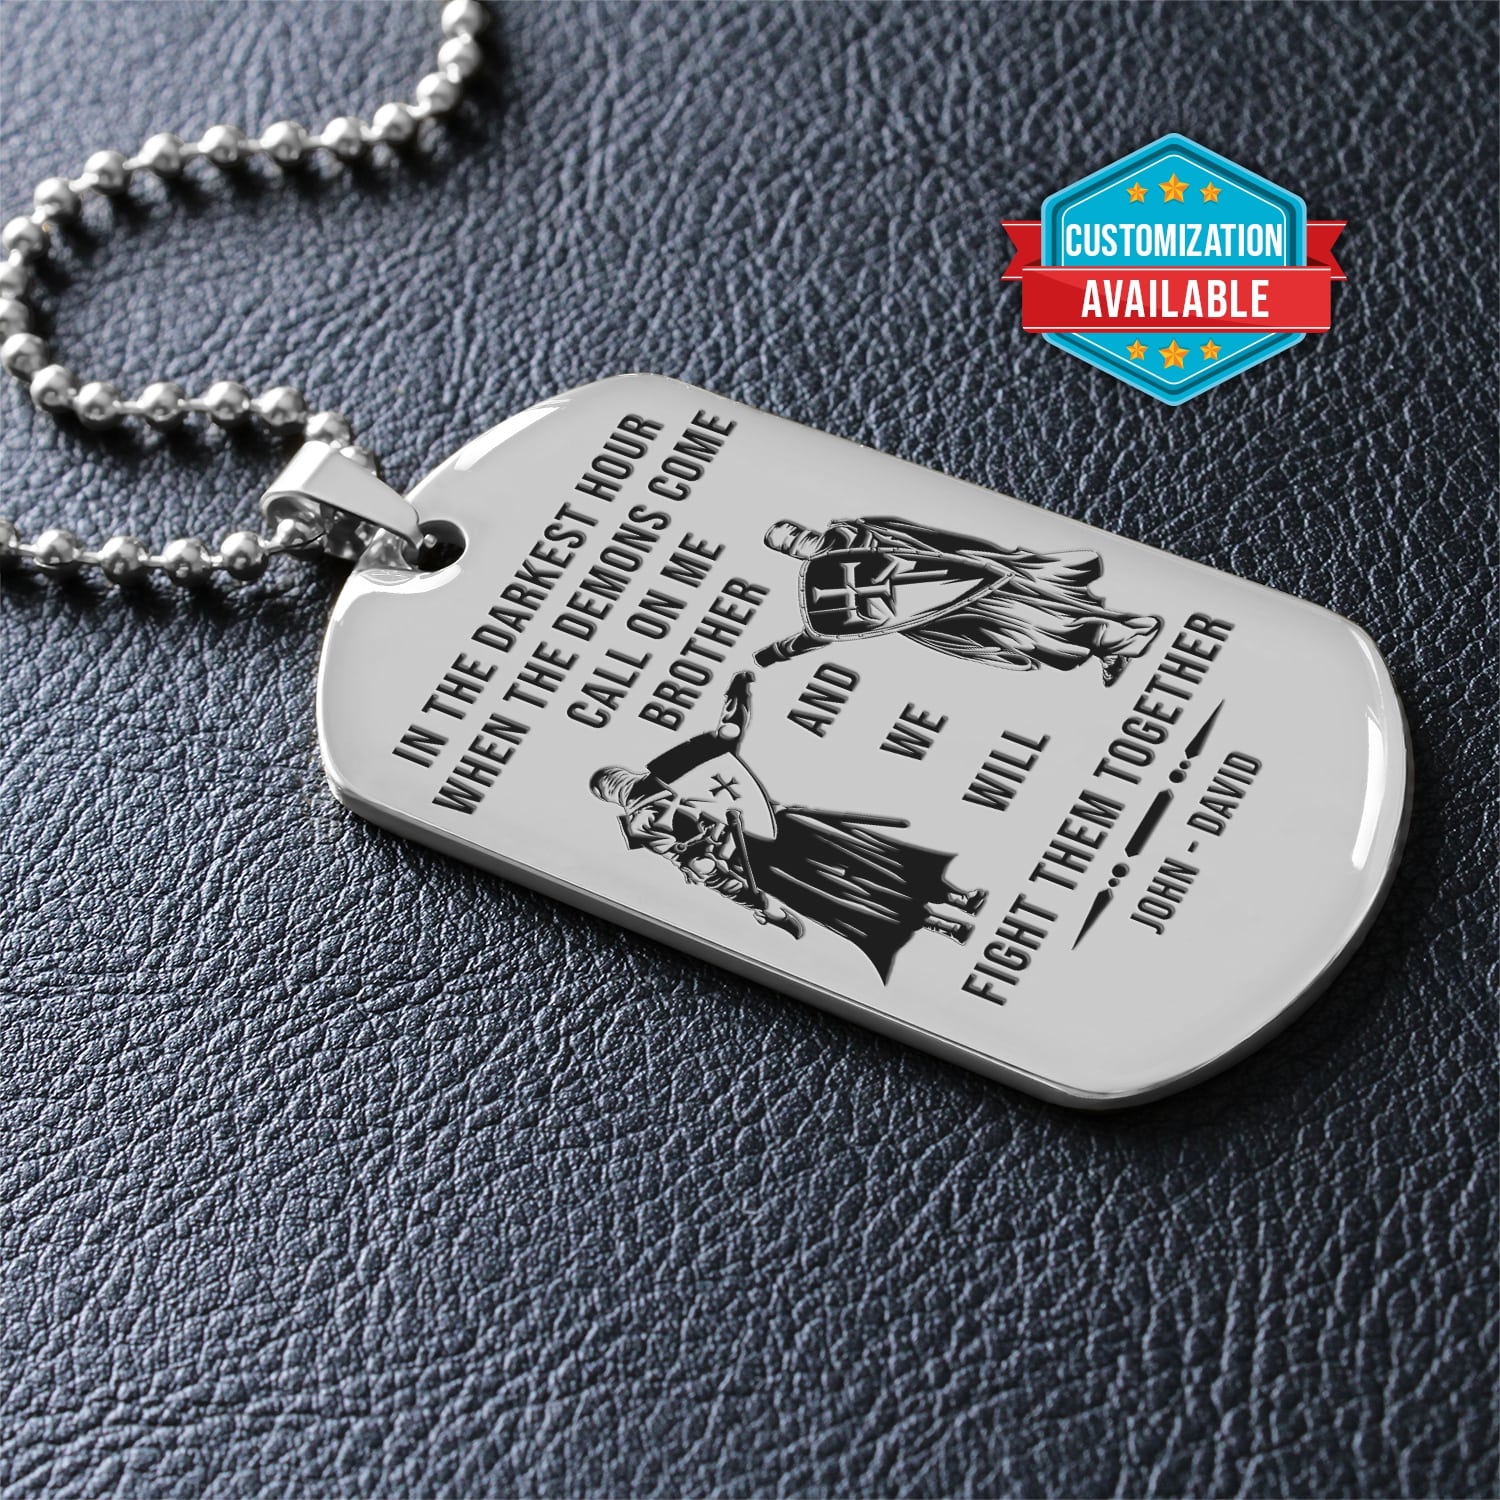 KTD032 - Call On Me Brother - Knights Templar - Silver Dog Tag